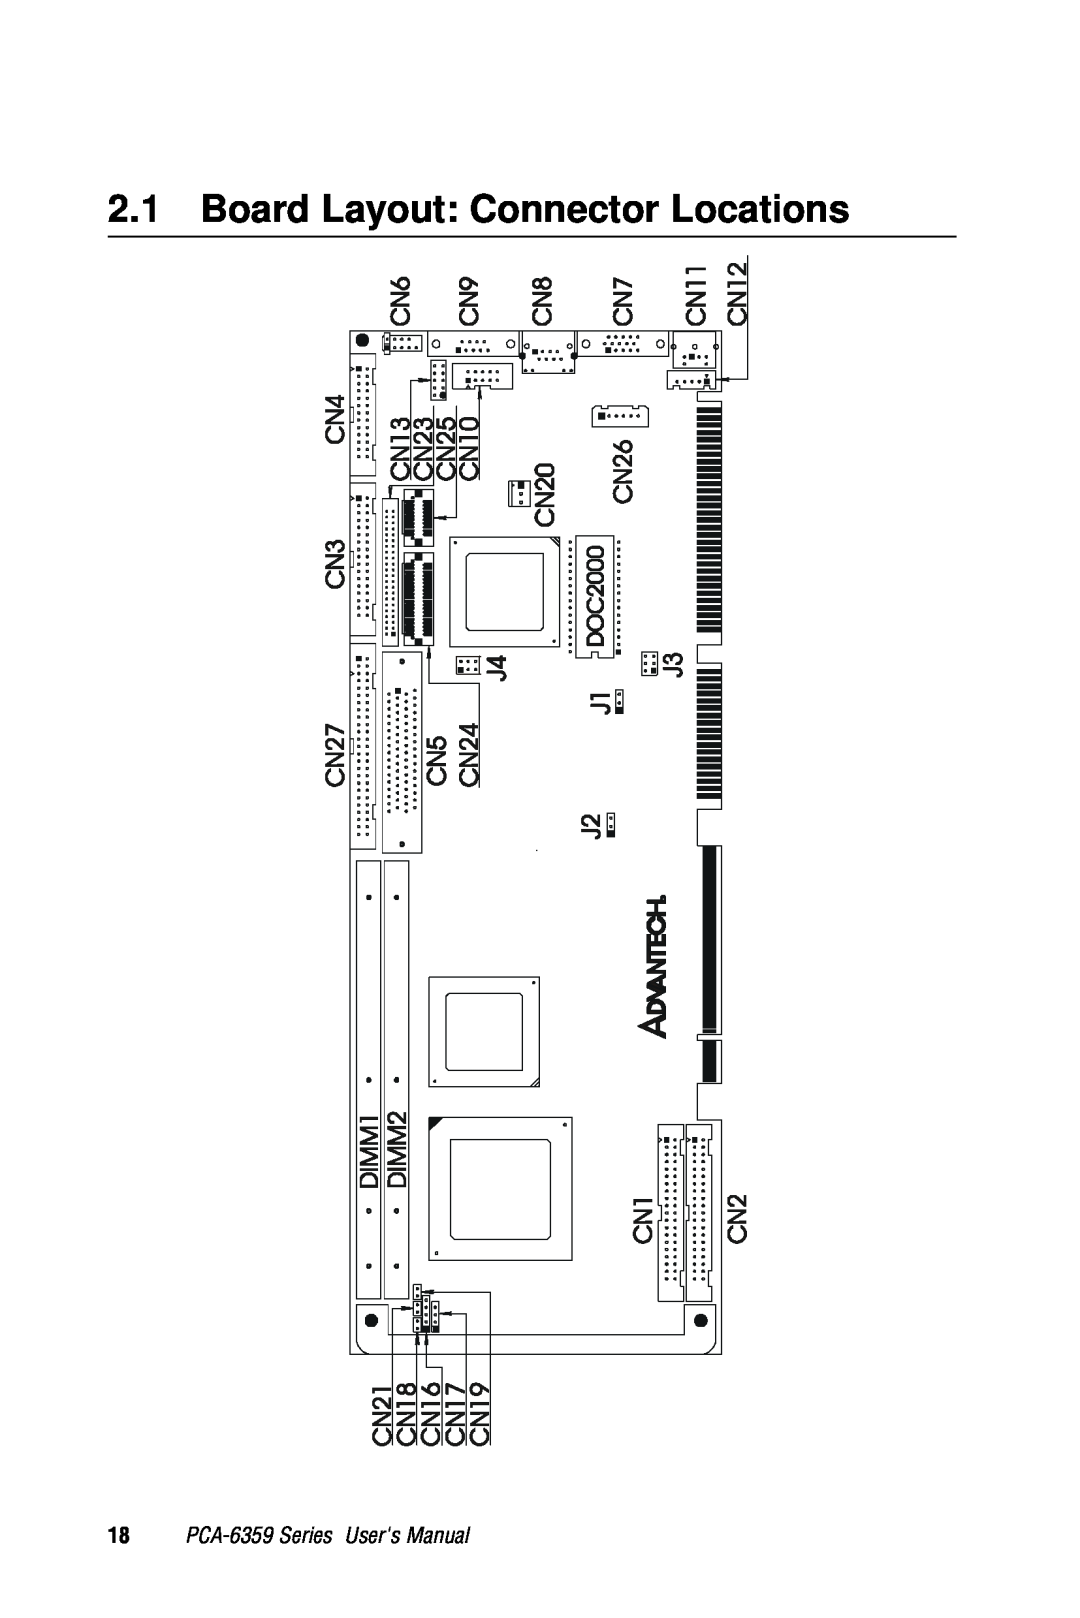 Advantech user manual Board Layout Connector Locations, PCA-6359 Series Users Manual 